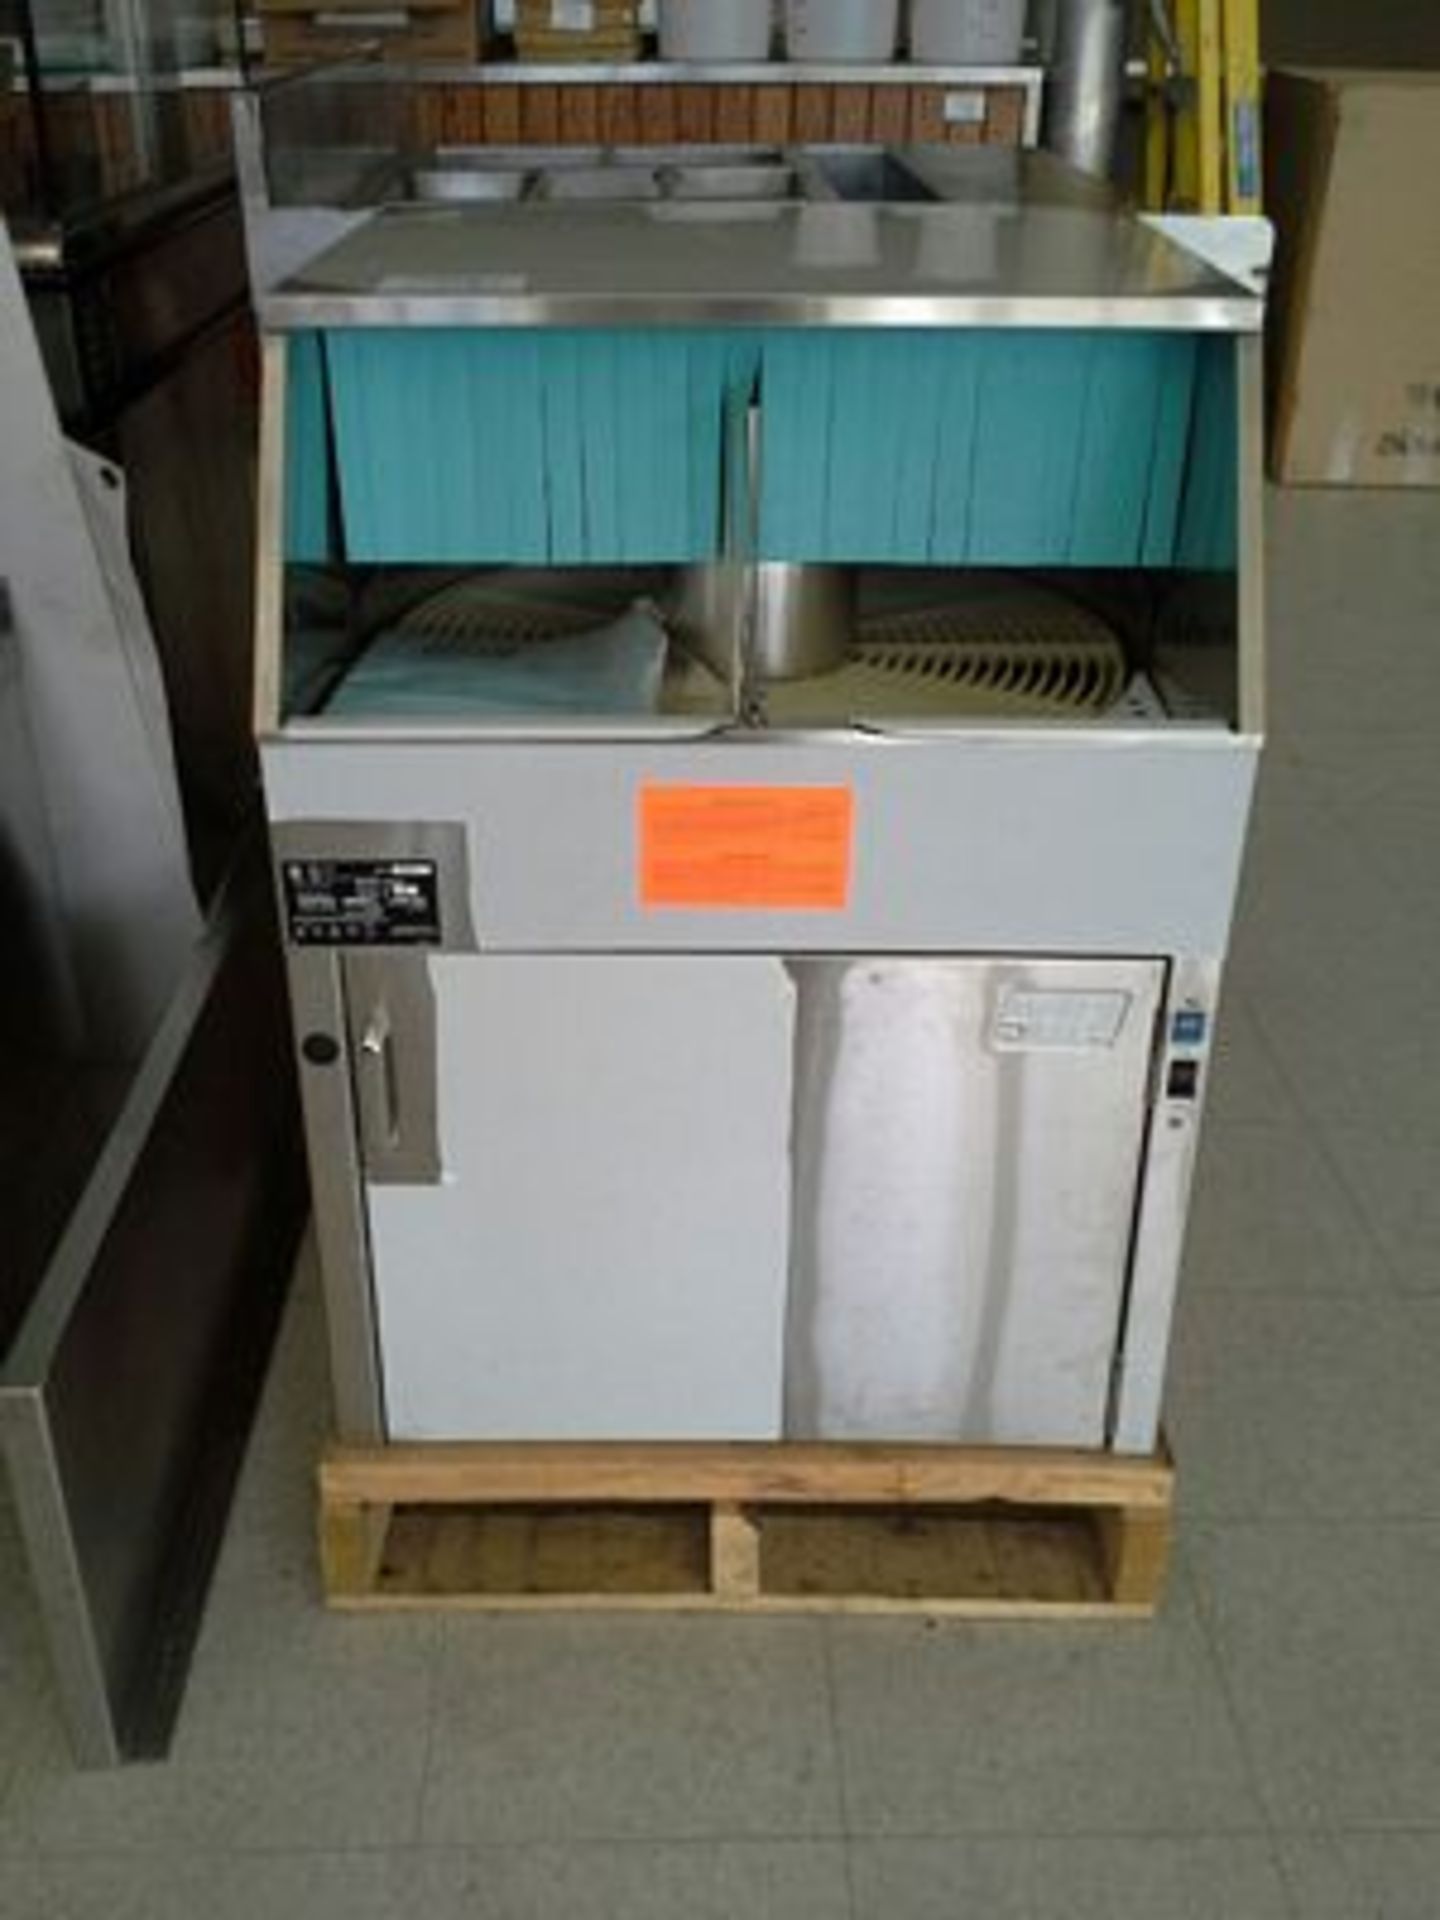 Moyer Diebel Model M6 - Under Counter Rotary Glass Washer includes manuals - Appears unused